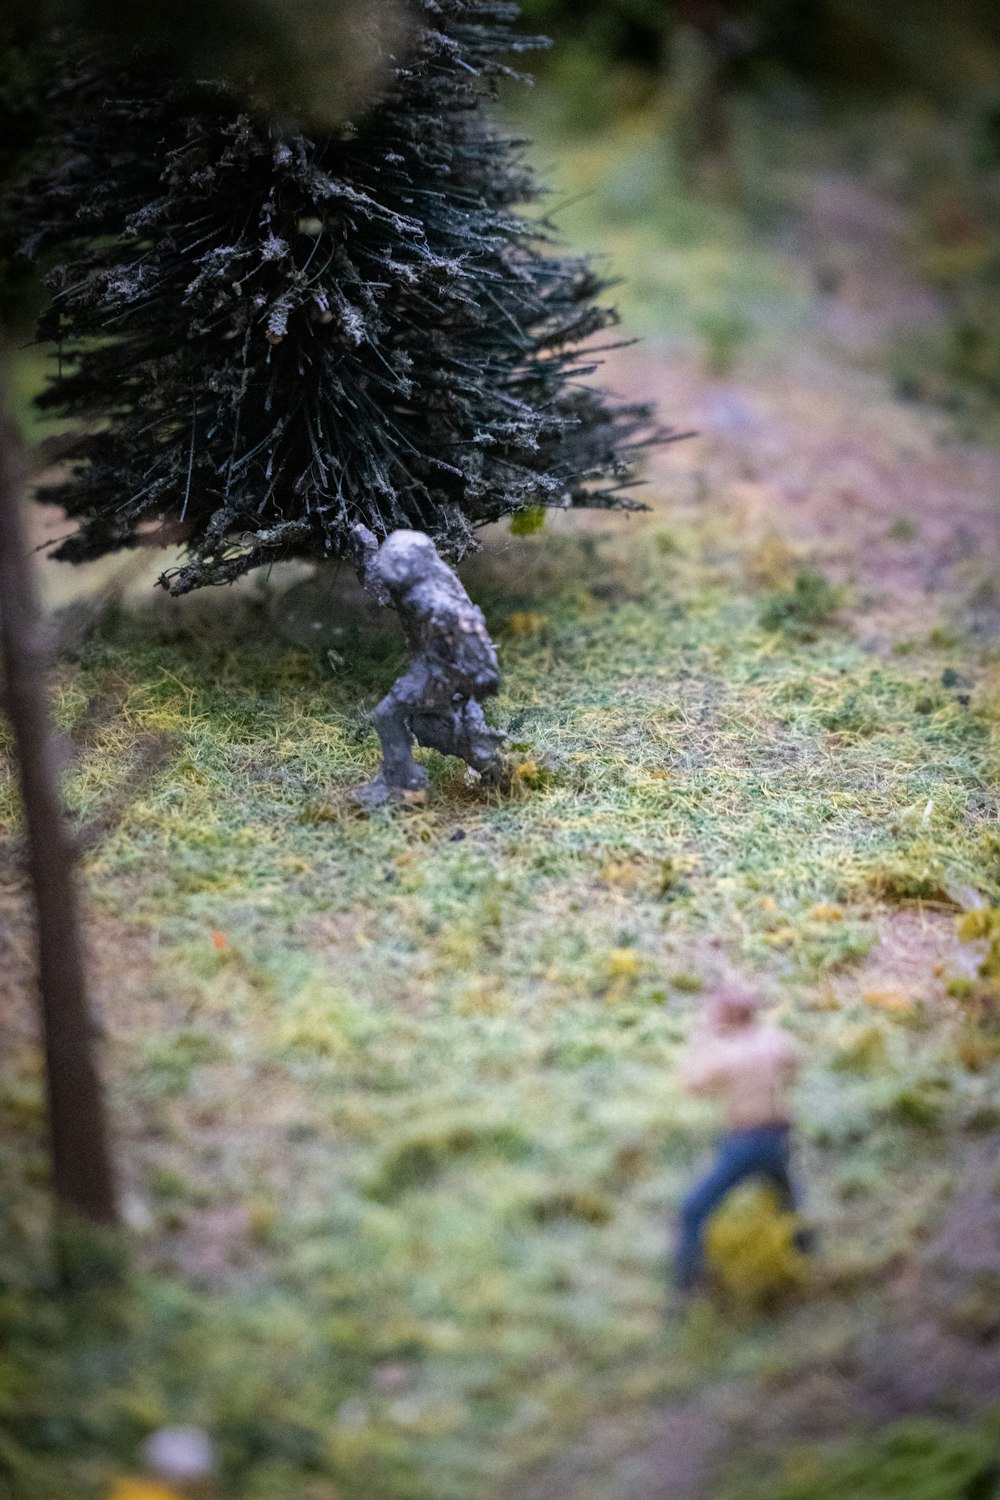 a toy soldier is in the grass next to a tree